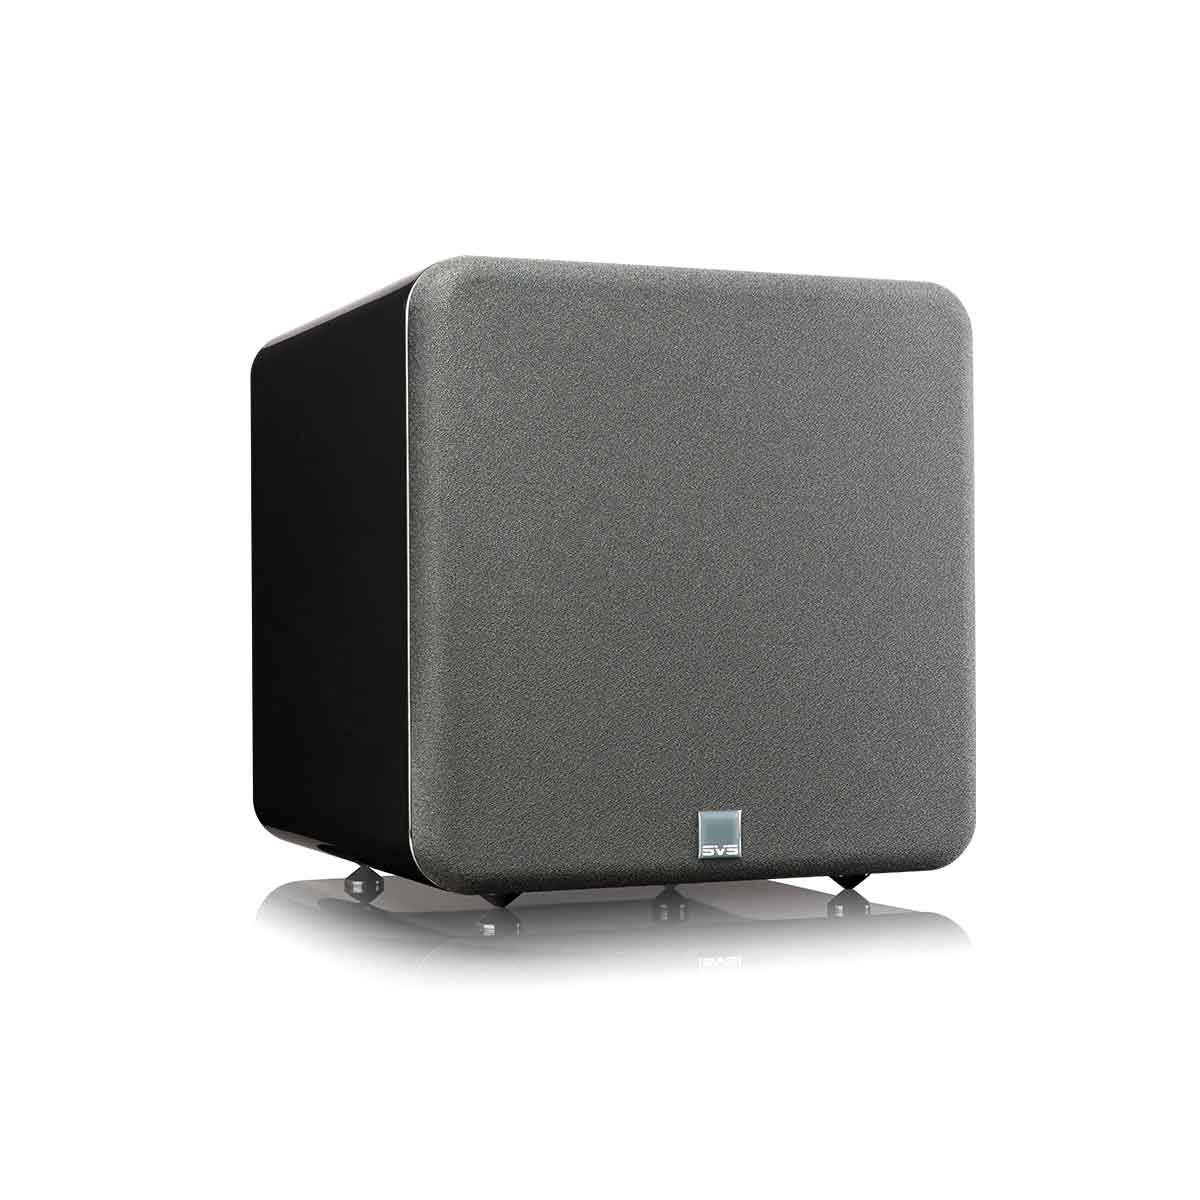 SVS SB-1000 Pro Series Subwoofer in Piano Black with grill